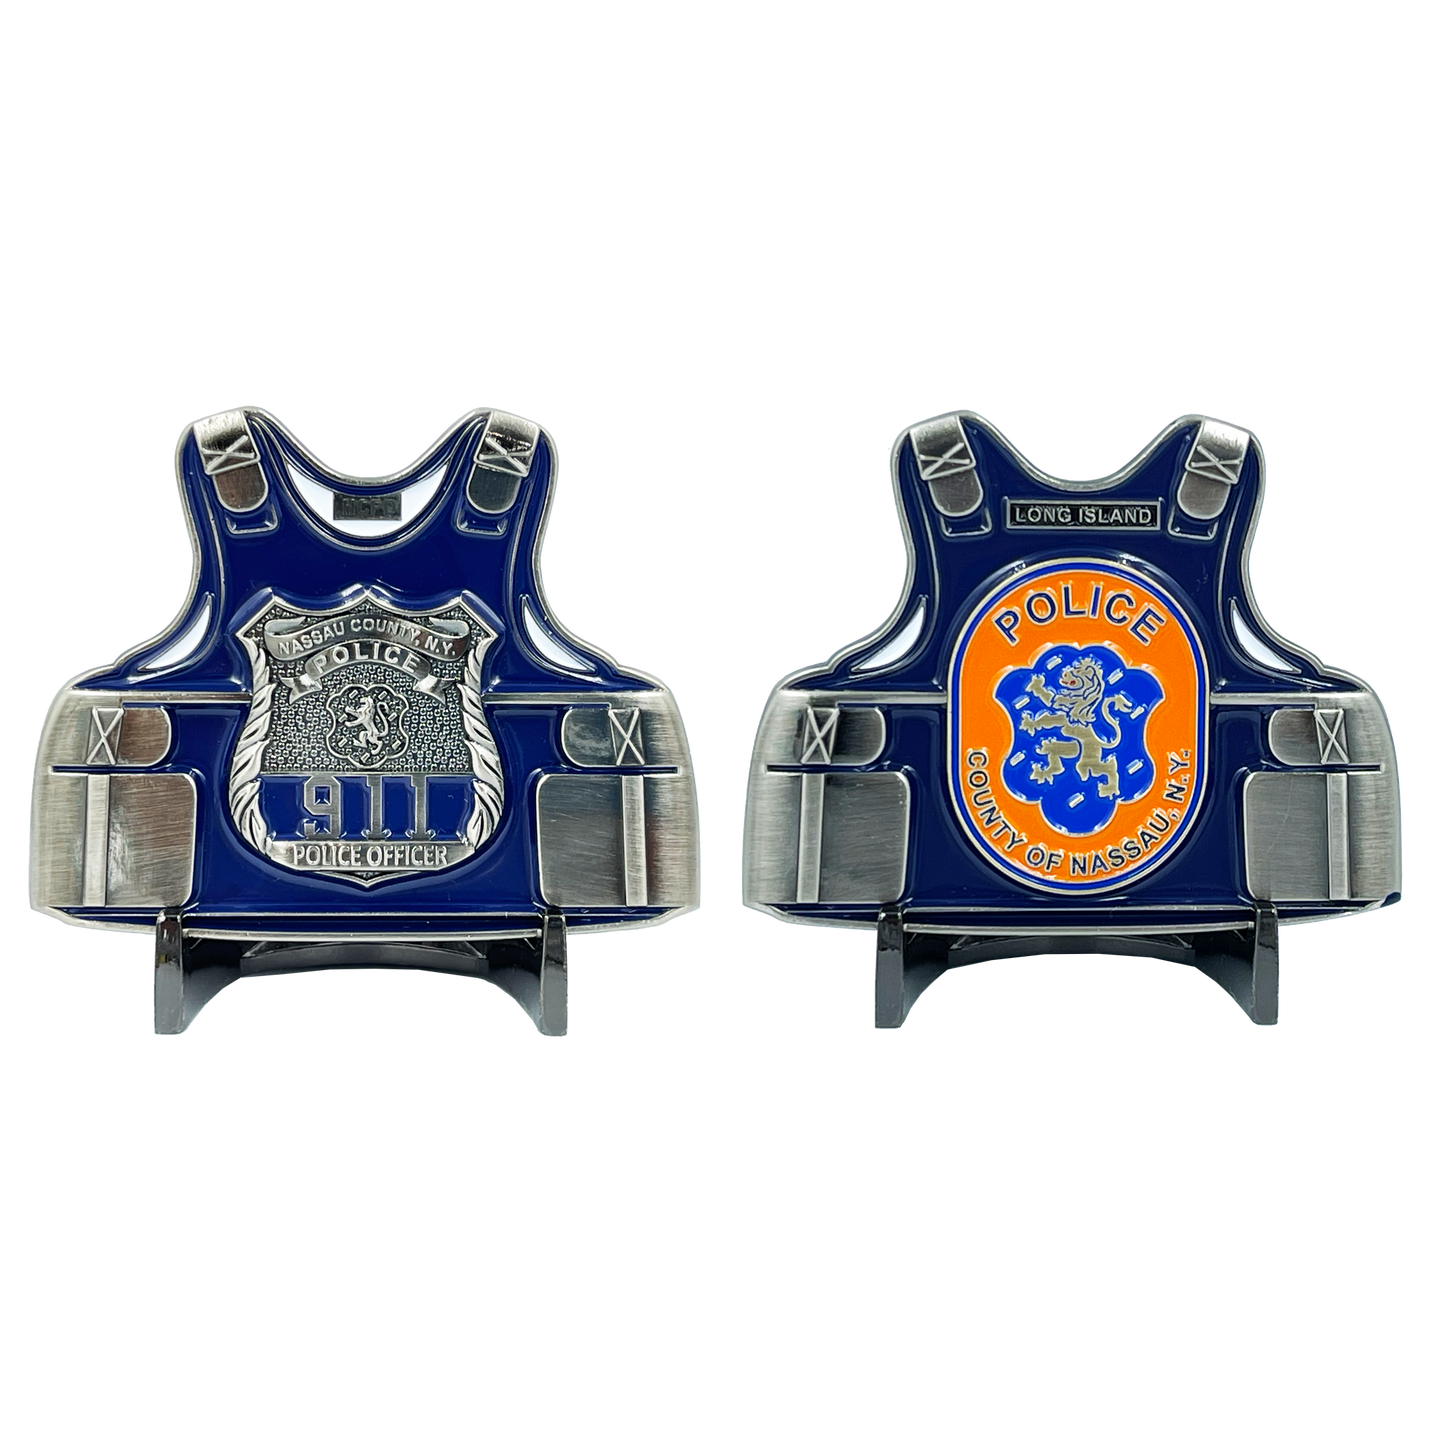 BL7-009 Nassau County Police Department NCPD Long Island Police Officer Body Armor Challenge Coin